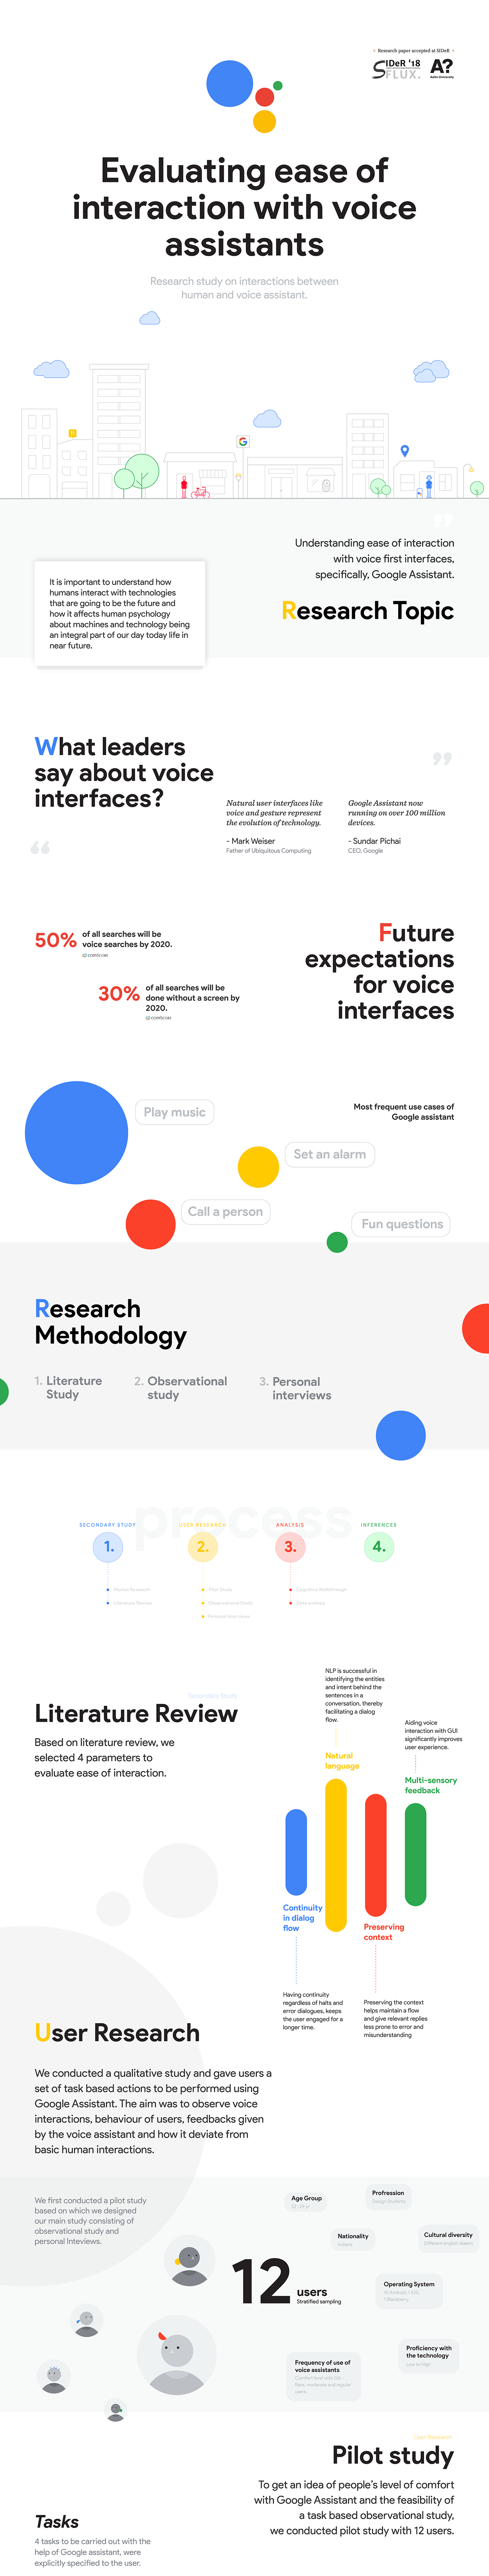 research google Voice assistant ux UX Research google assistant Illustrator Interaction design  User research future